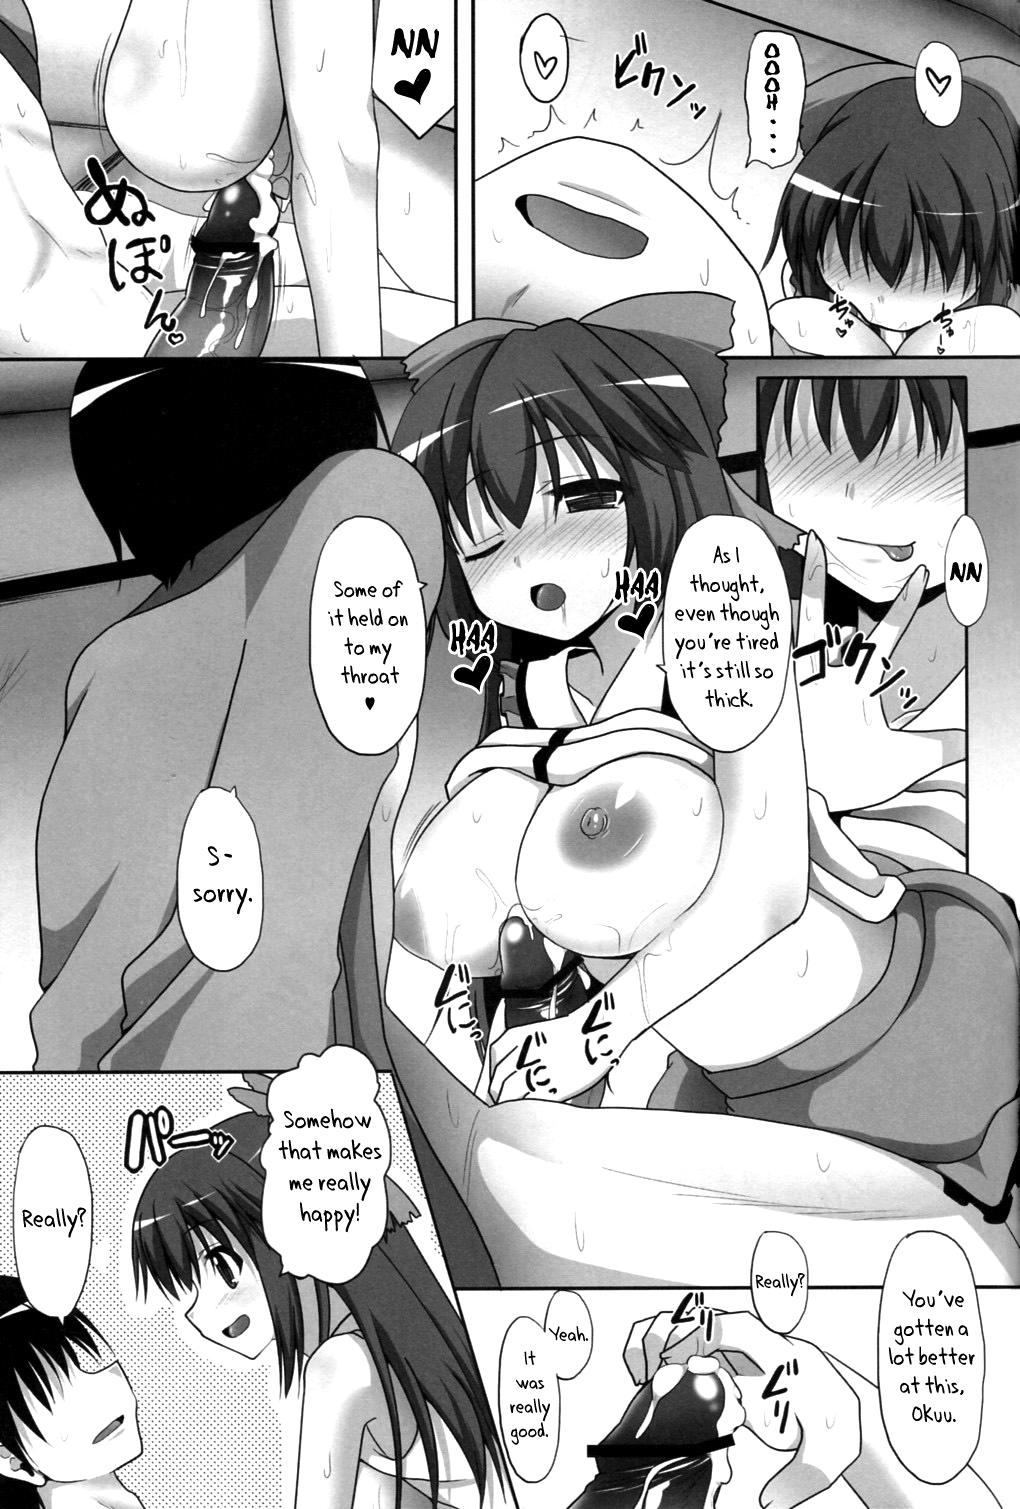 Wet Aidane 8 | Love Seed 8 - Touhou project Ballbusting - Page 12